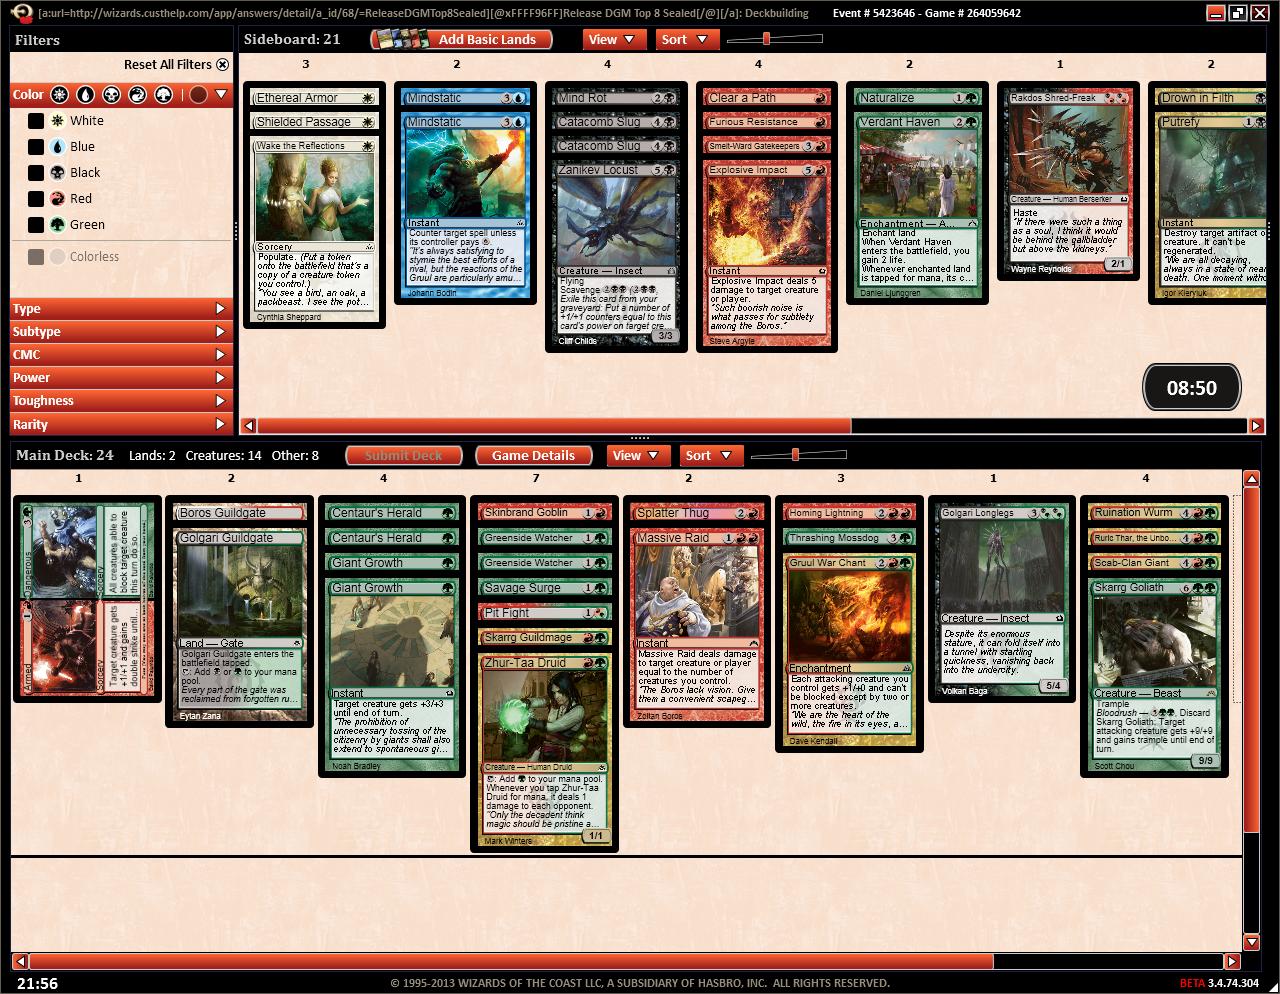 modo cube drafts live here